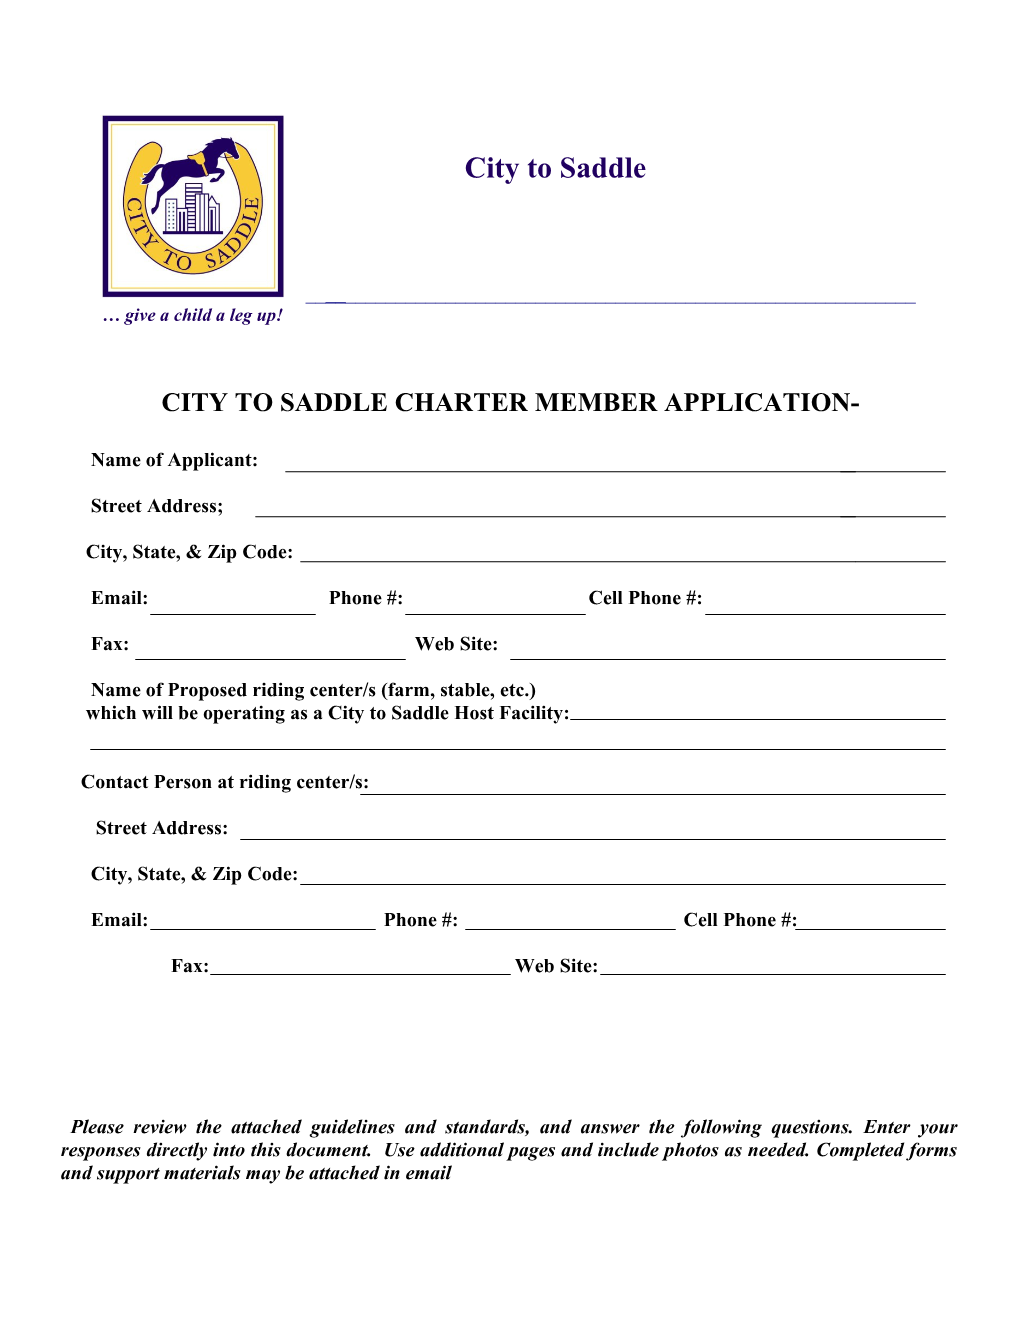 City to Saddle Charter Member Application